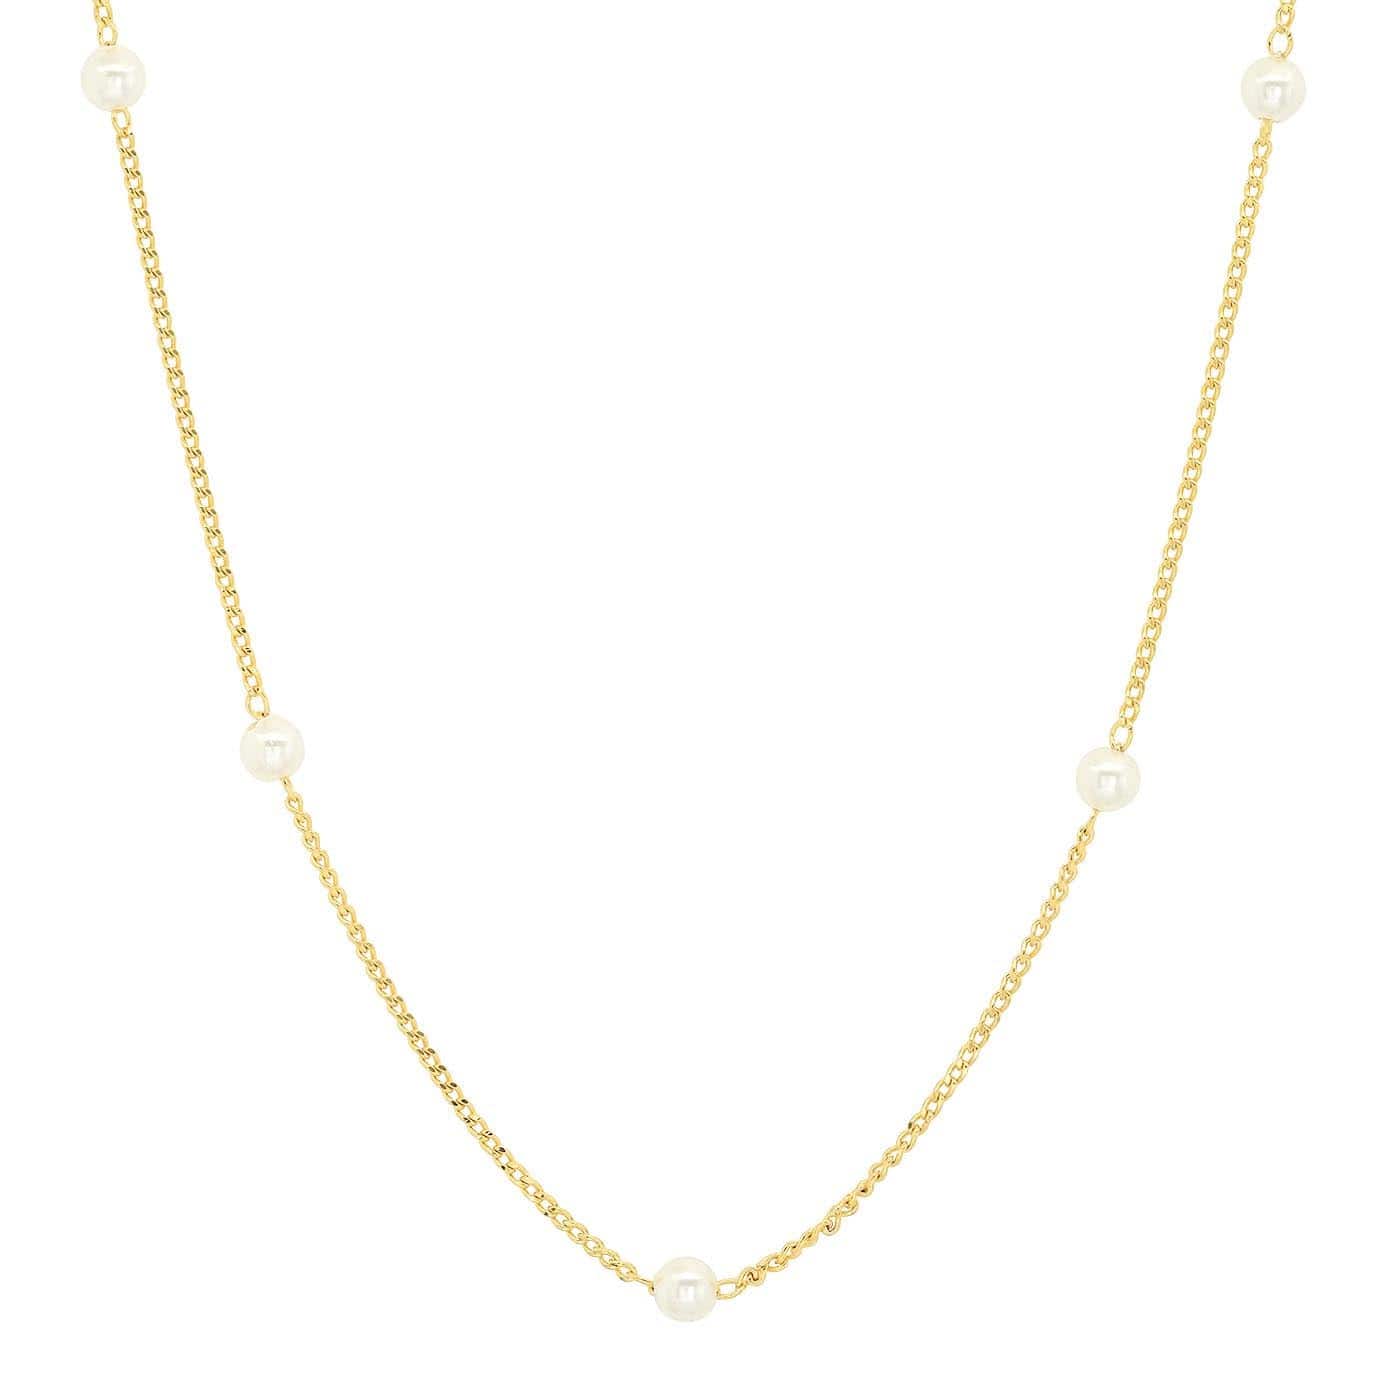 TAI JEWELRY Necklace Gold Vermeil Delicate Pearl Station Necklace